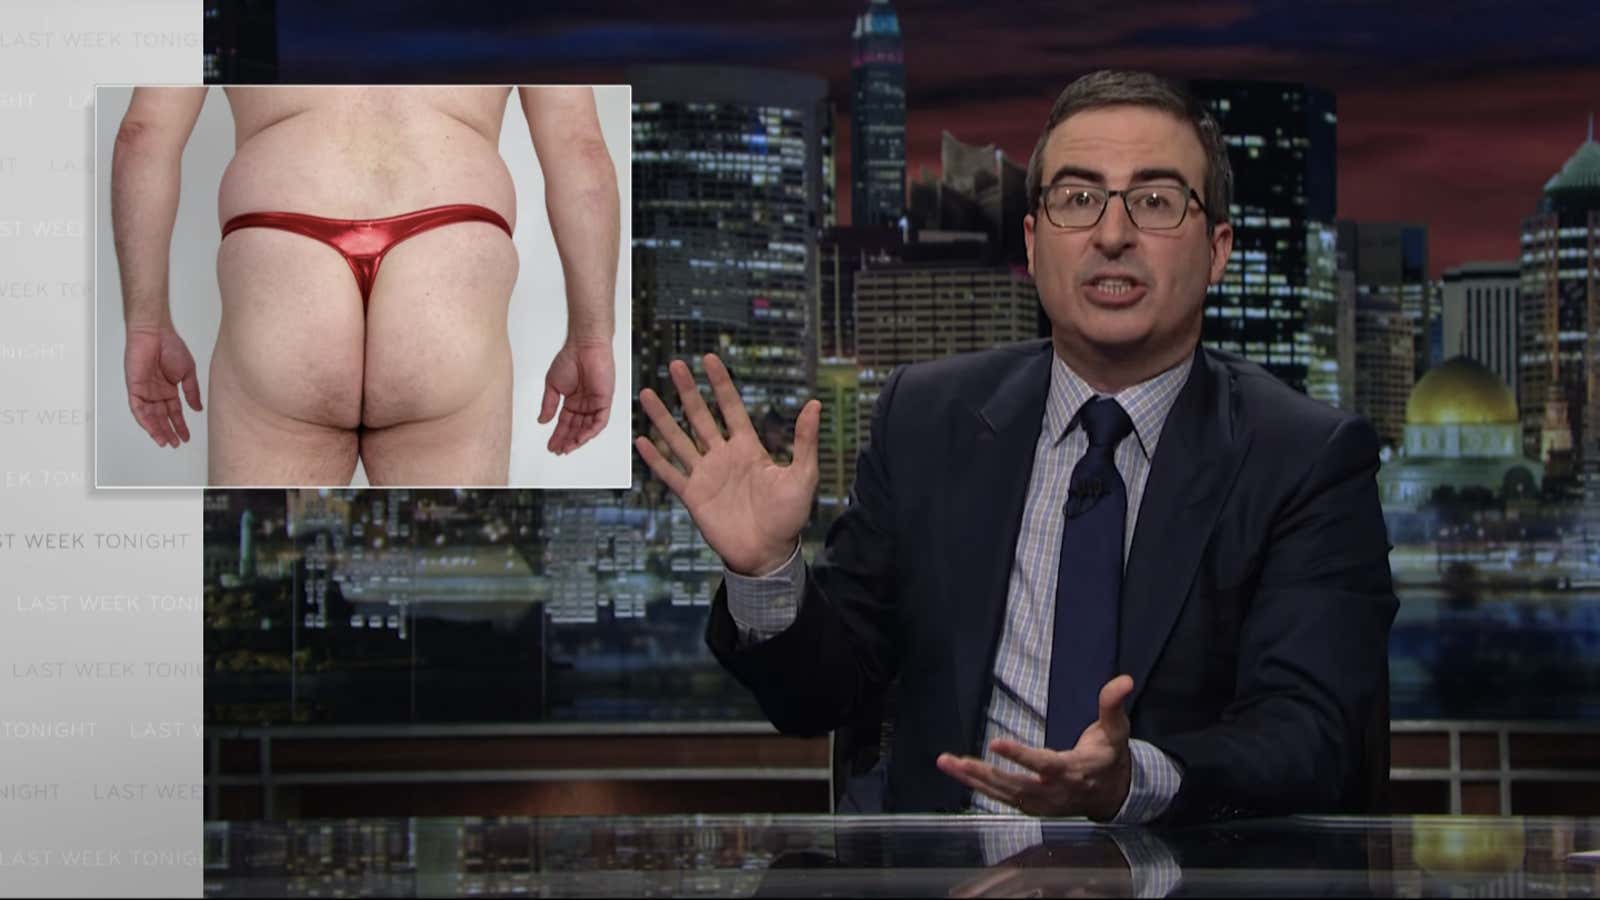 The thong problem.